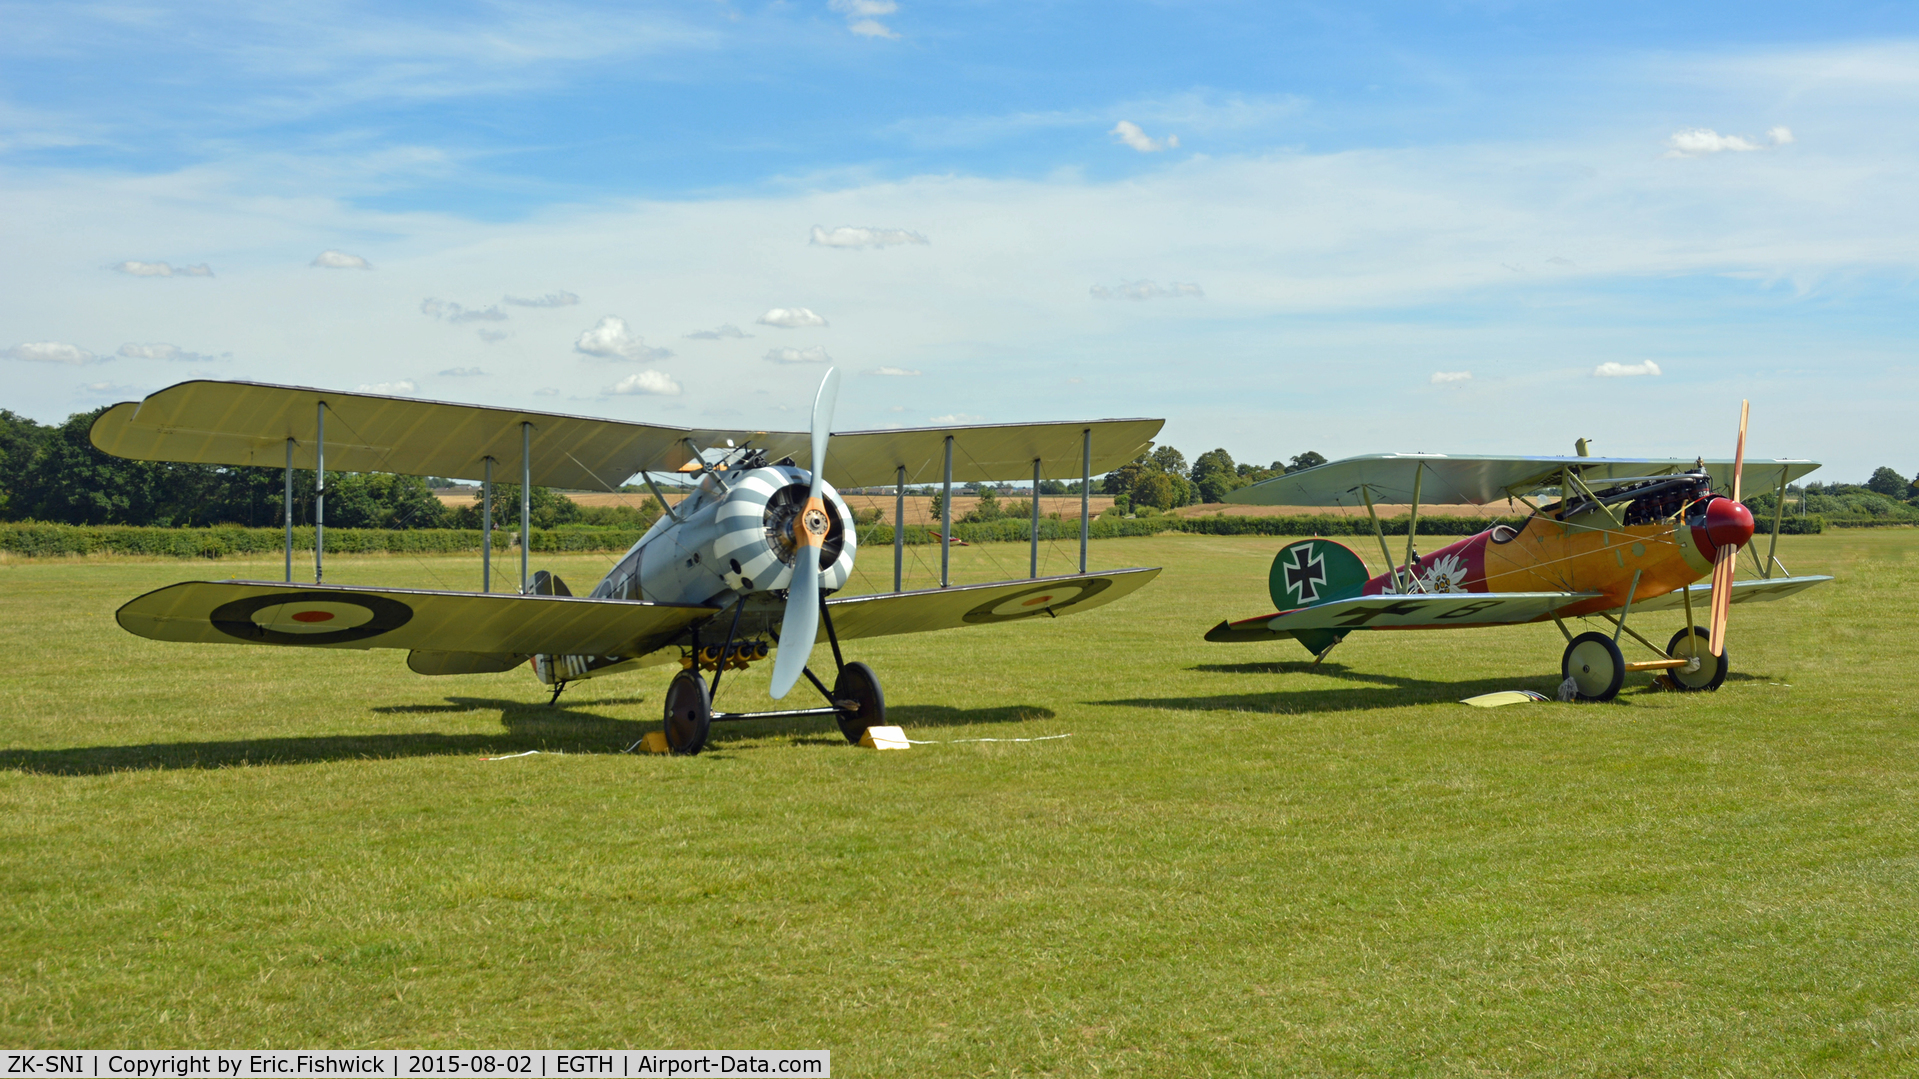 ZK-SNI, 2011 The Vintage Aviator Sopwith 7F-1 Snipe Replica C/N 0112, 5. A pair of superb TVAL replica WW1 bi-planes at the Shuttleworth Wings and Wheels Airshow, Aug. 2015.